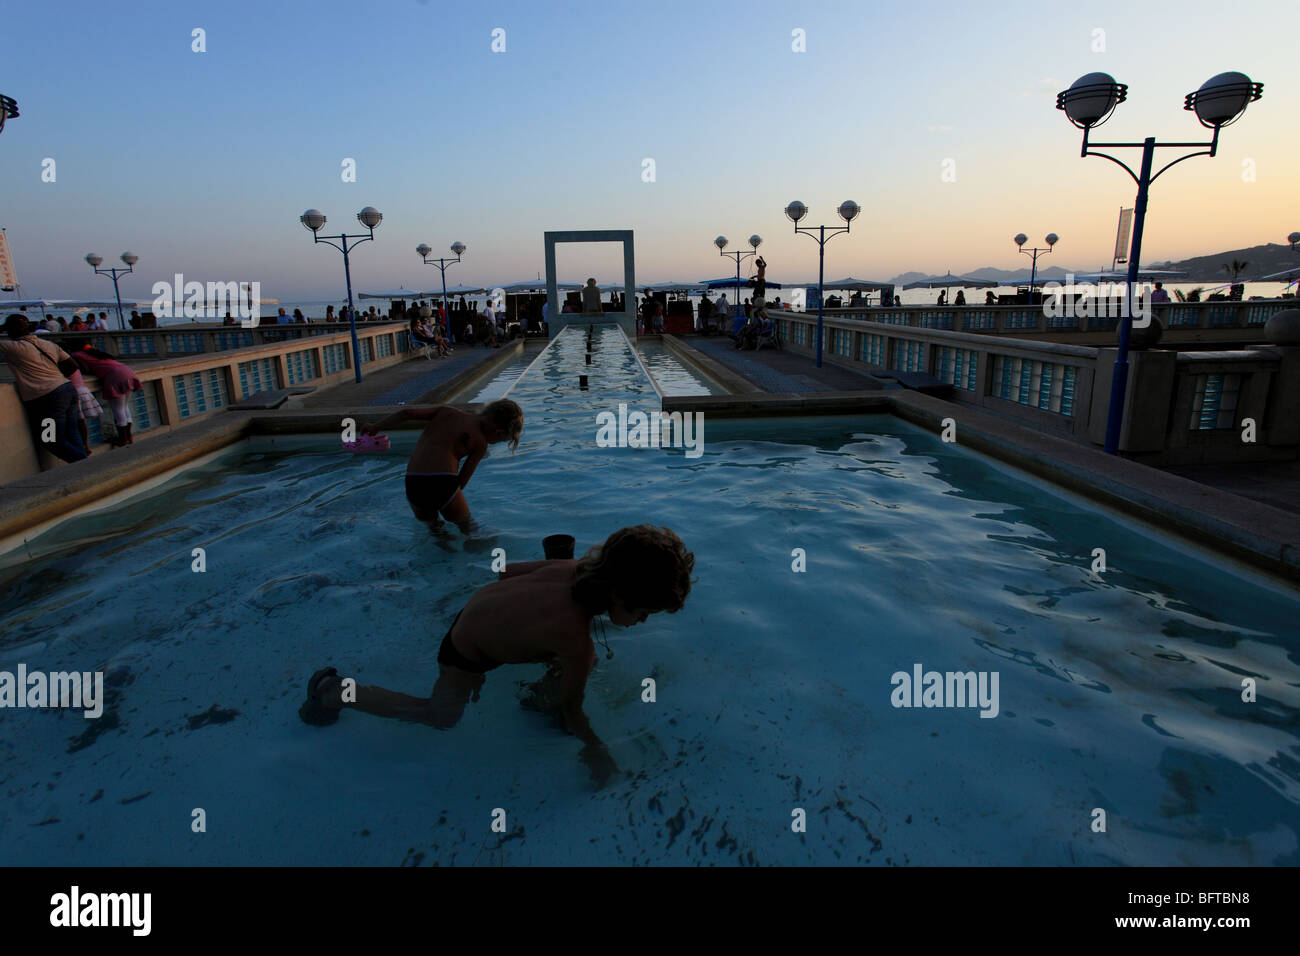 The mediterranean coastal city of Juan les Pins near Cannes and the fountain where kids are playing inside at night. Stock Photo